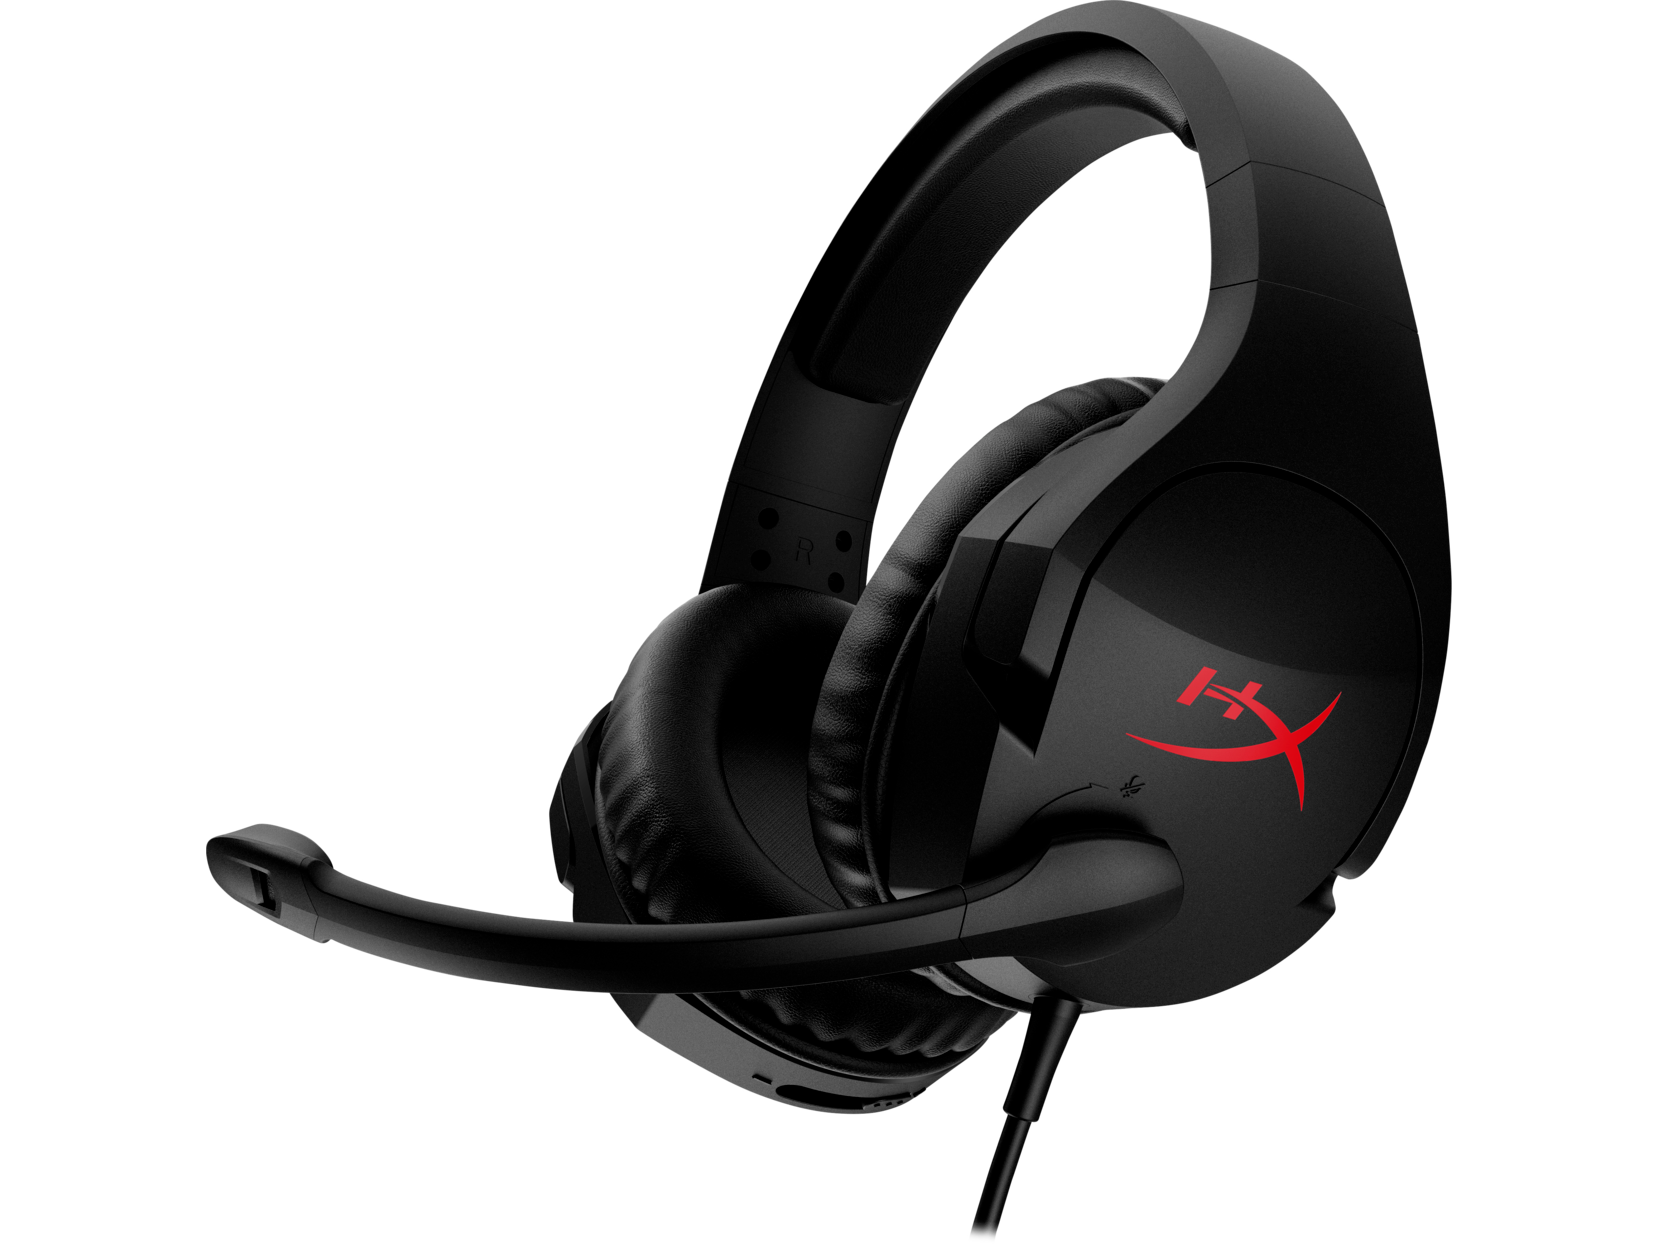 100016438 – HYPERX – CLOUD STINGER – HEADSET – PARA COMPUTER – WIRED.02